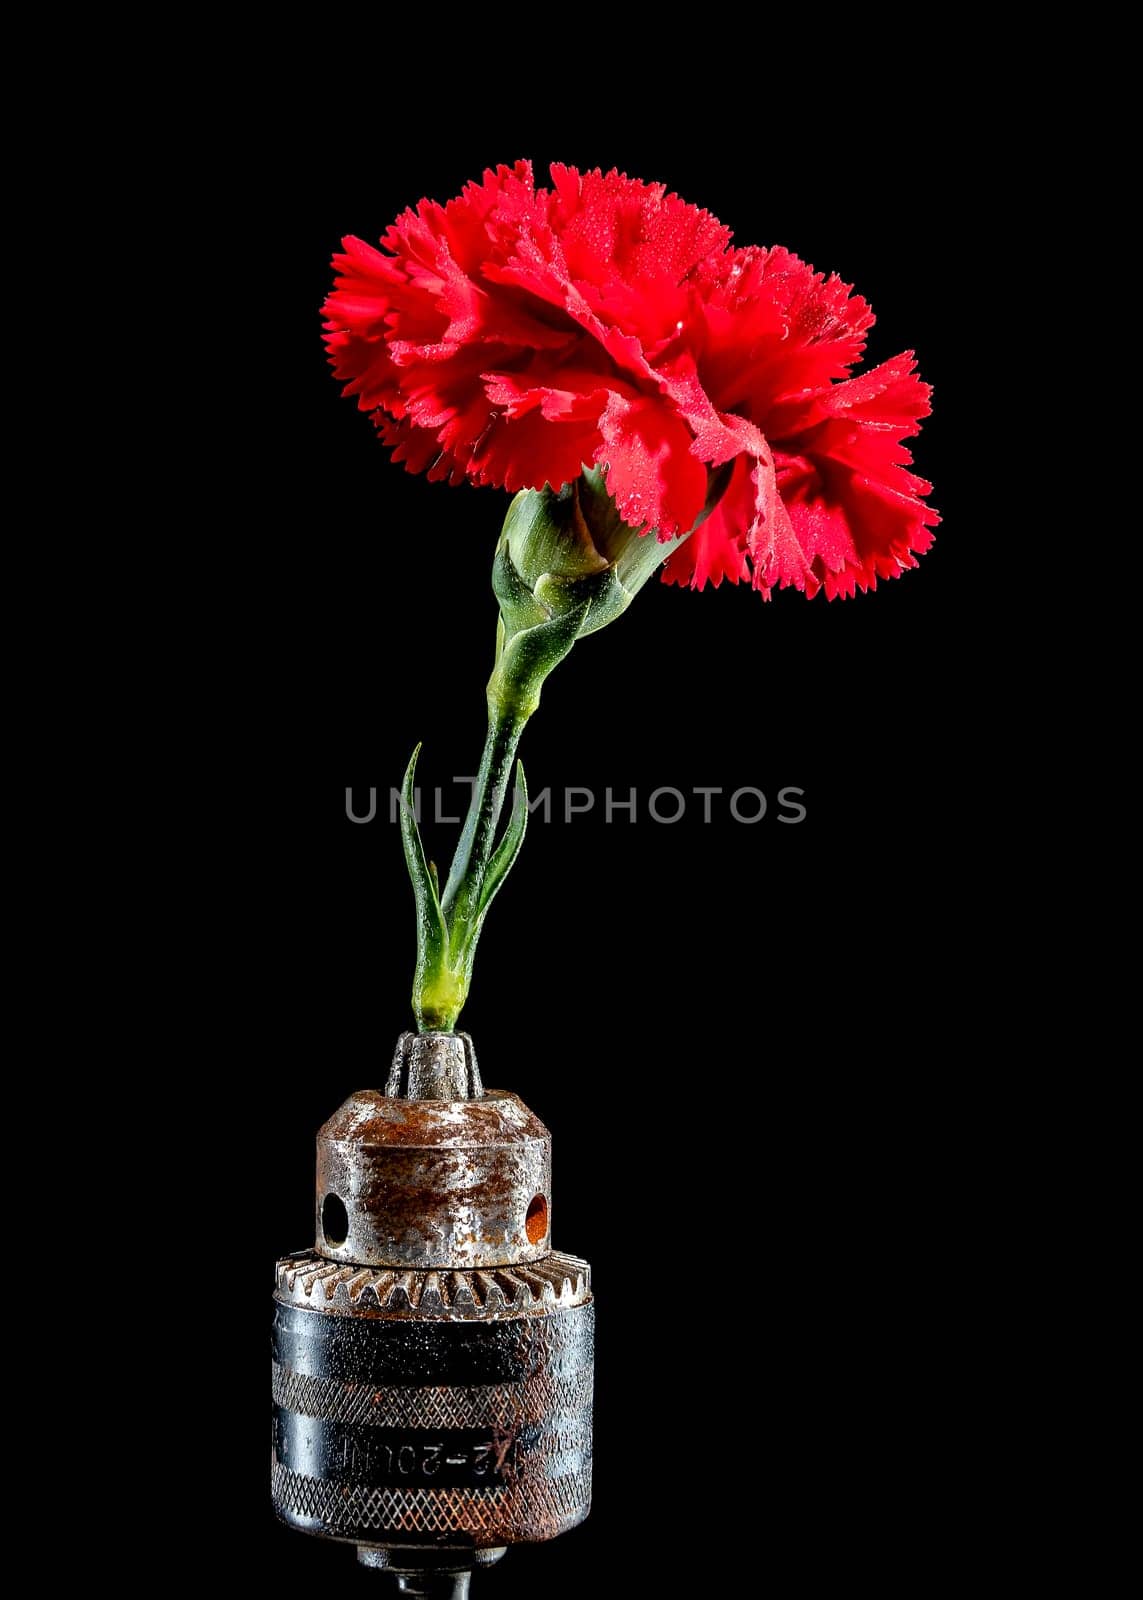 Creative still life with old rusty drill head and red carnation on a black background